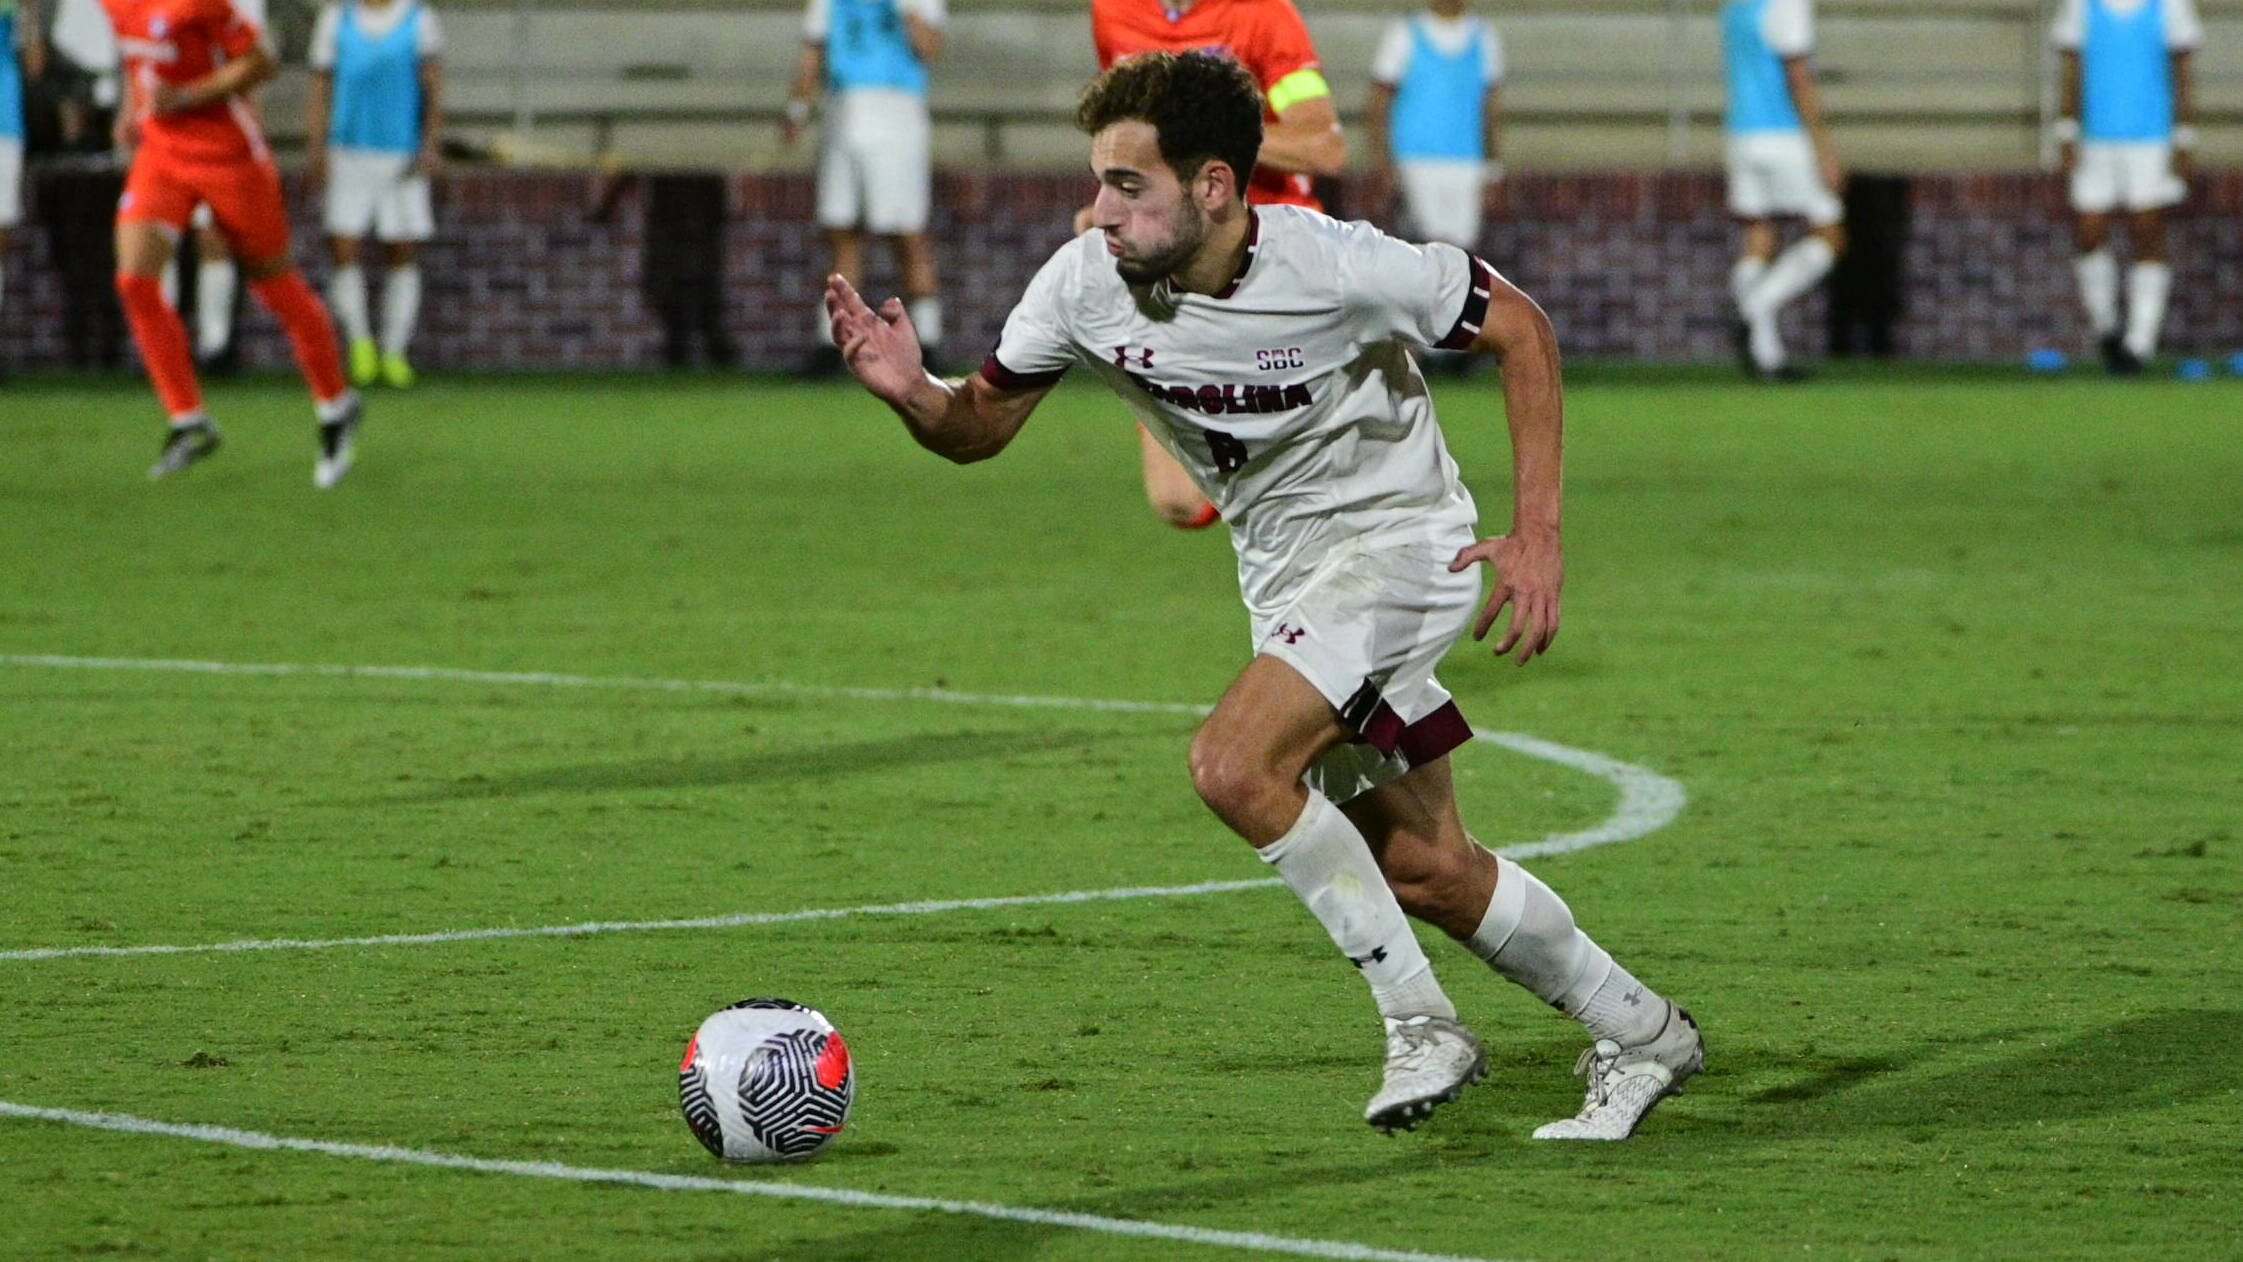 Gamecocks Drop Road Match to Tigers